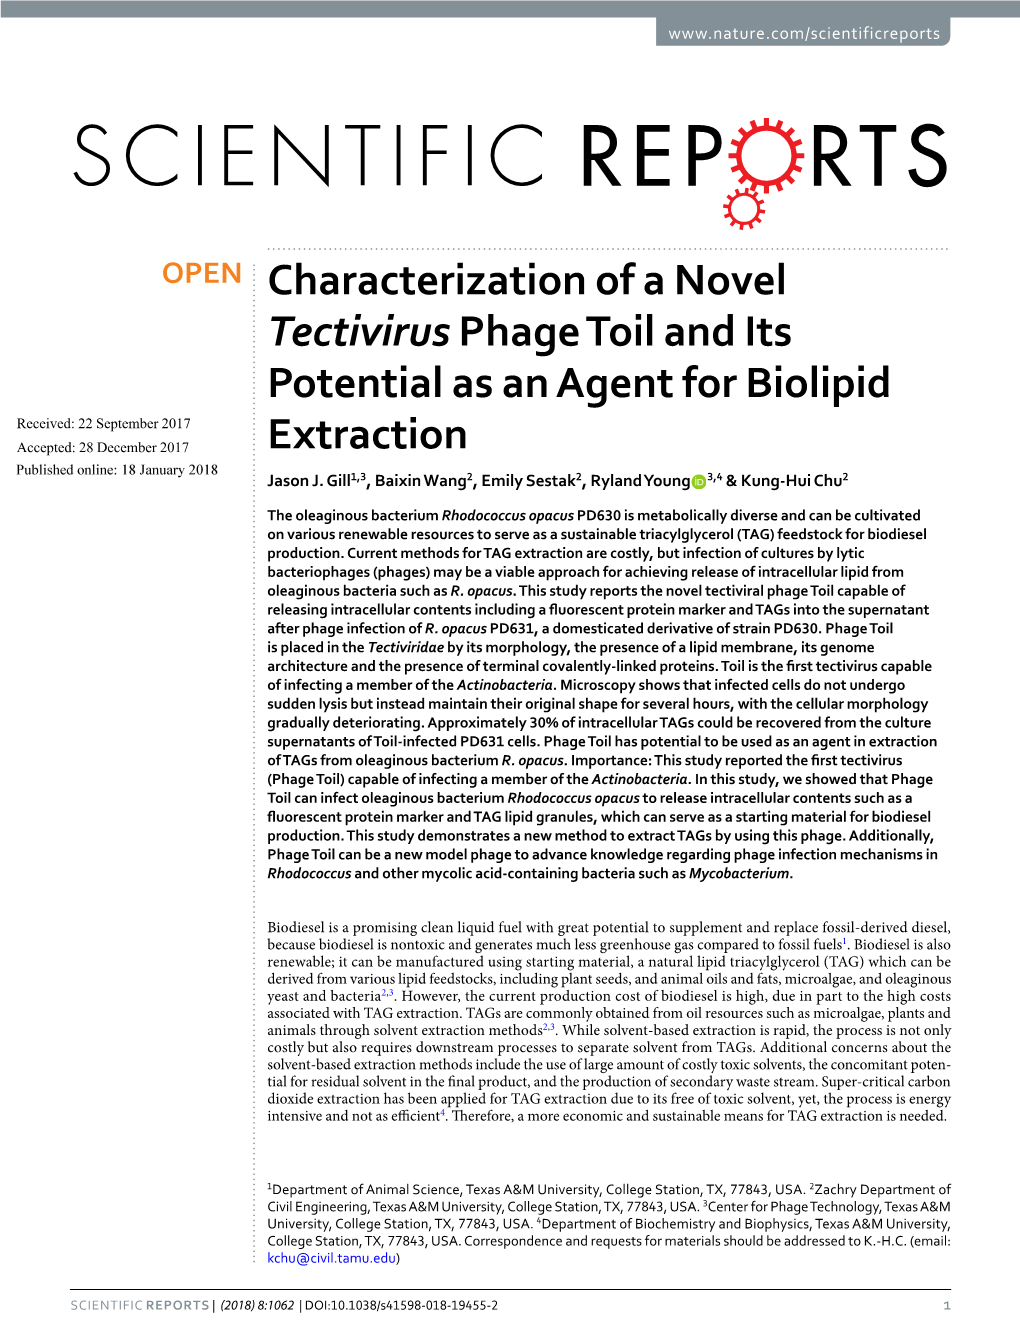 Characterization of a Novel Tectivirus Phage Toil and Its Potential As An